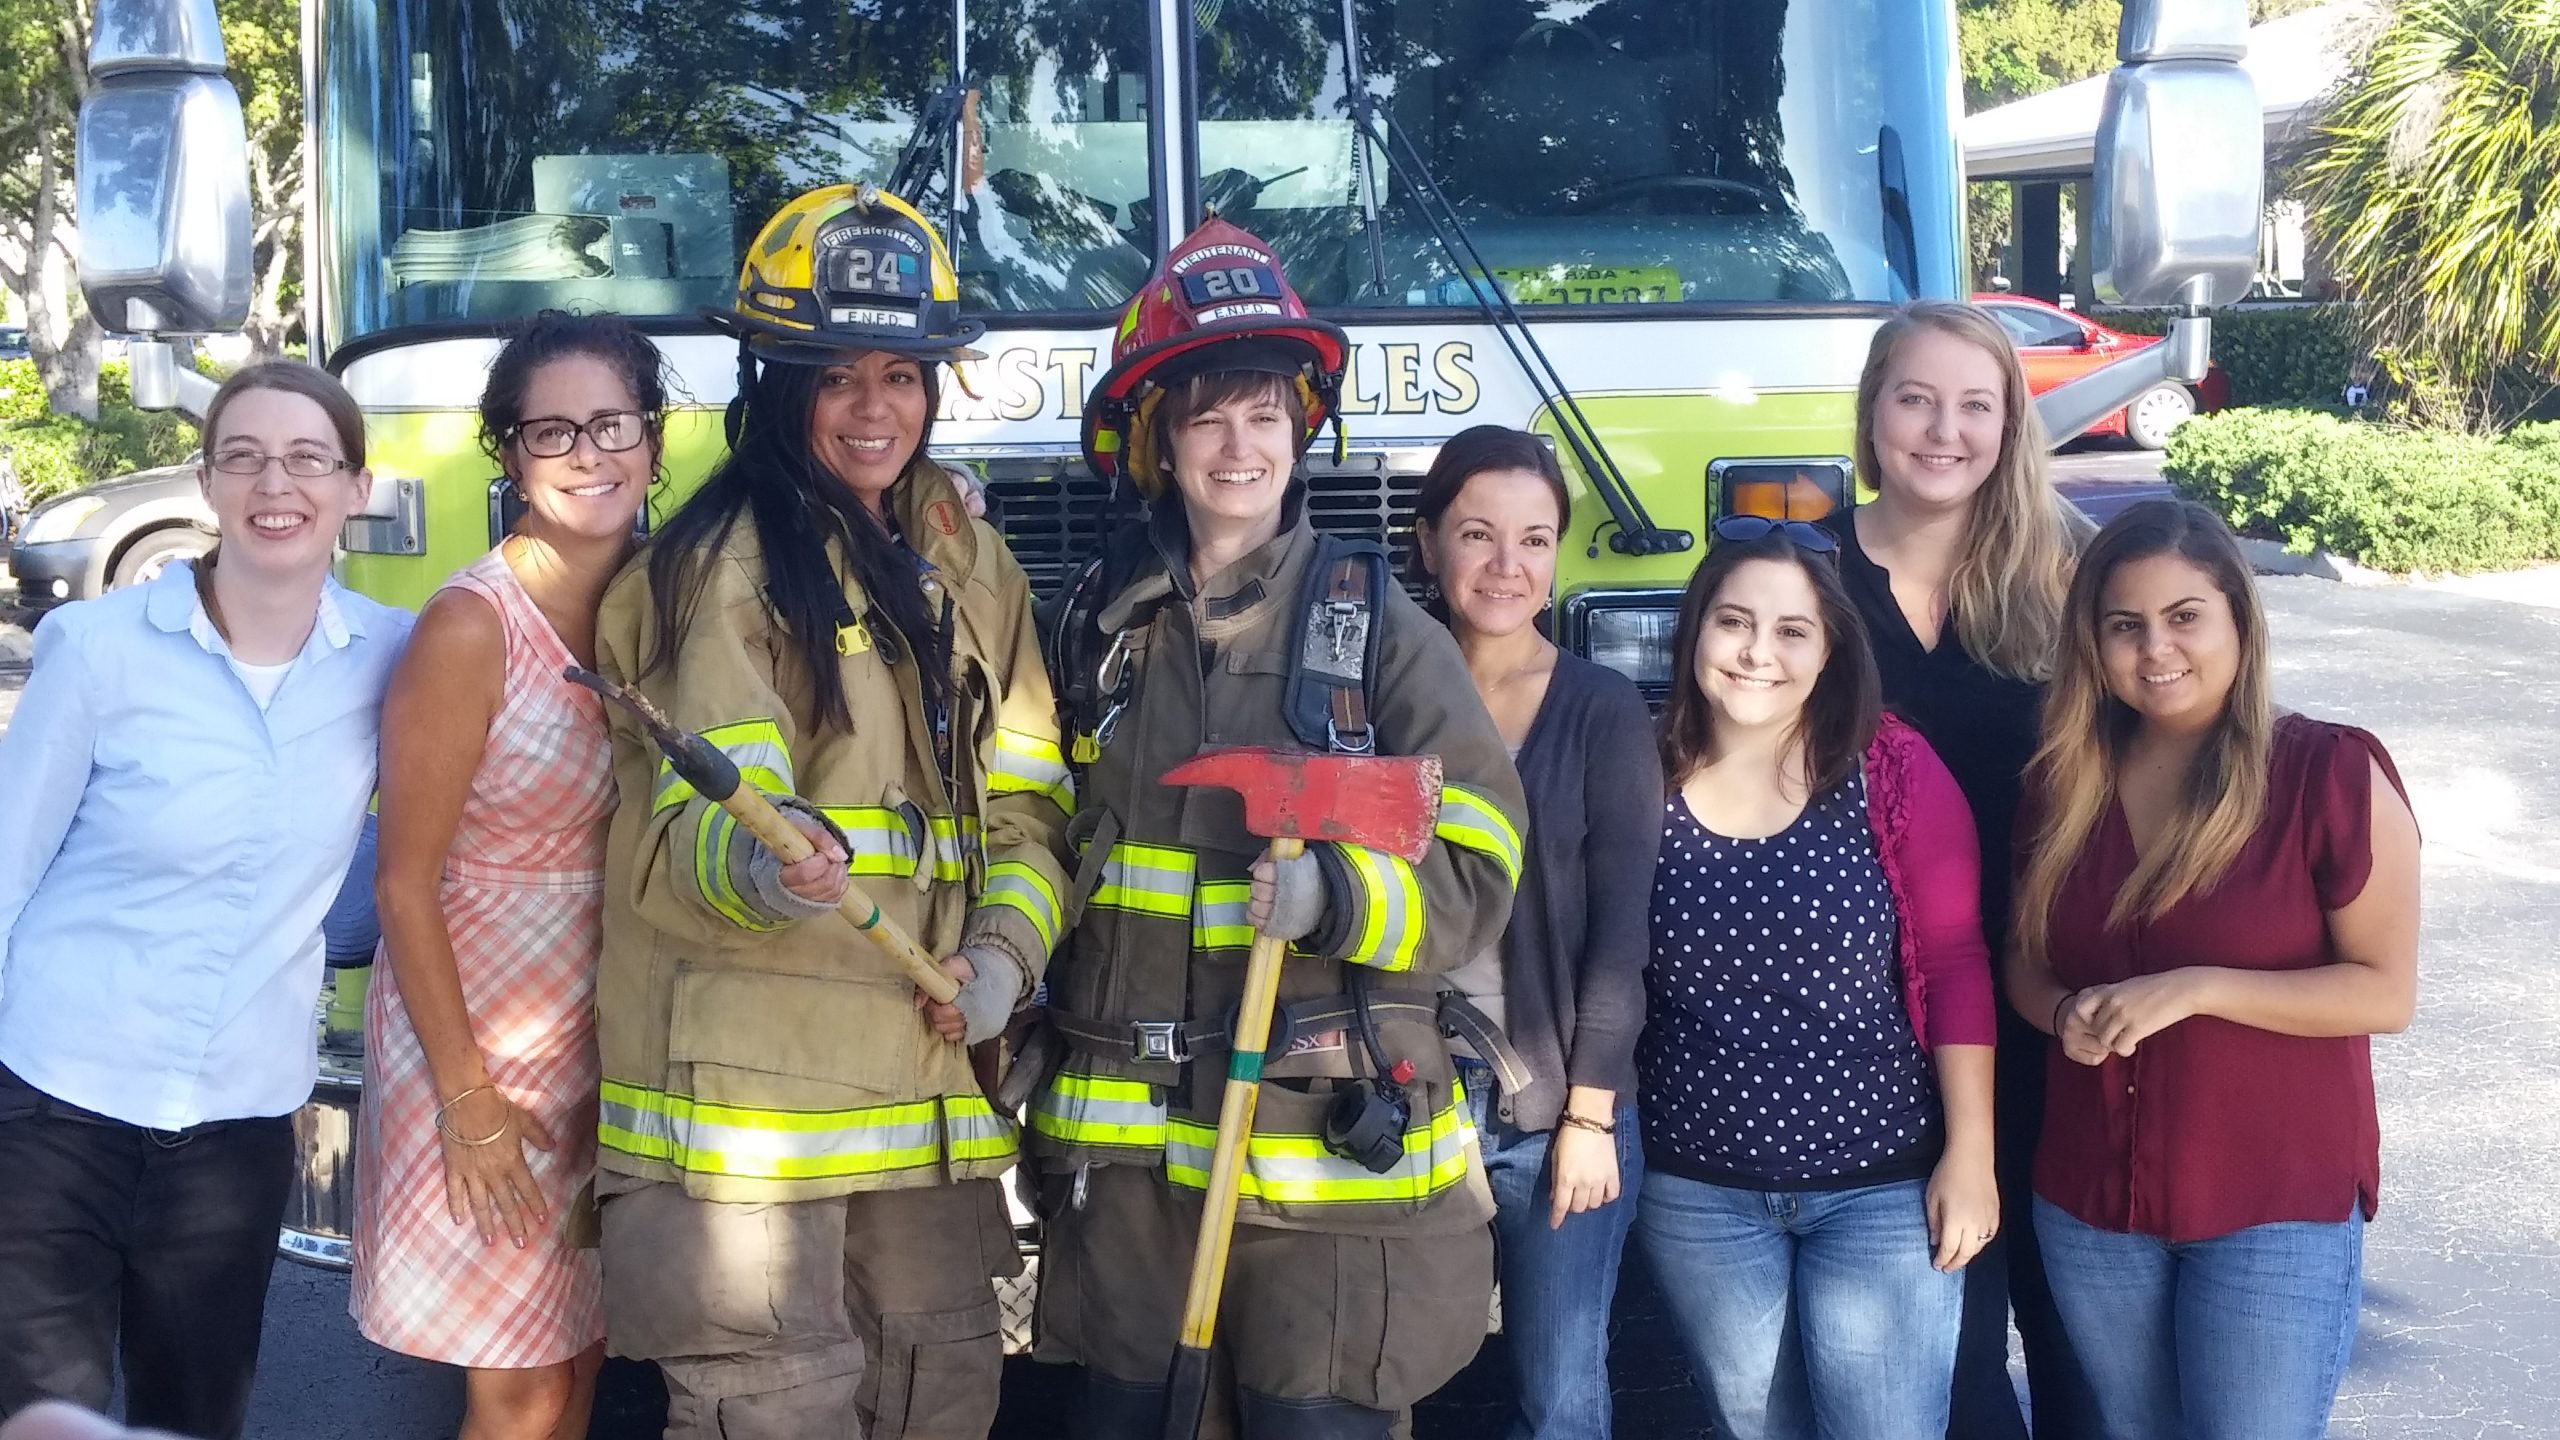 East Naples Fire Fighters visit RGB